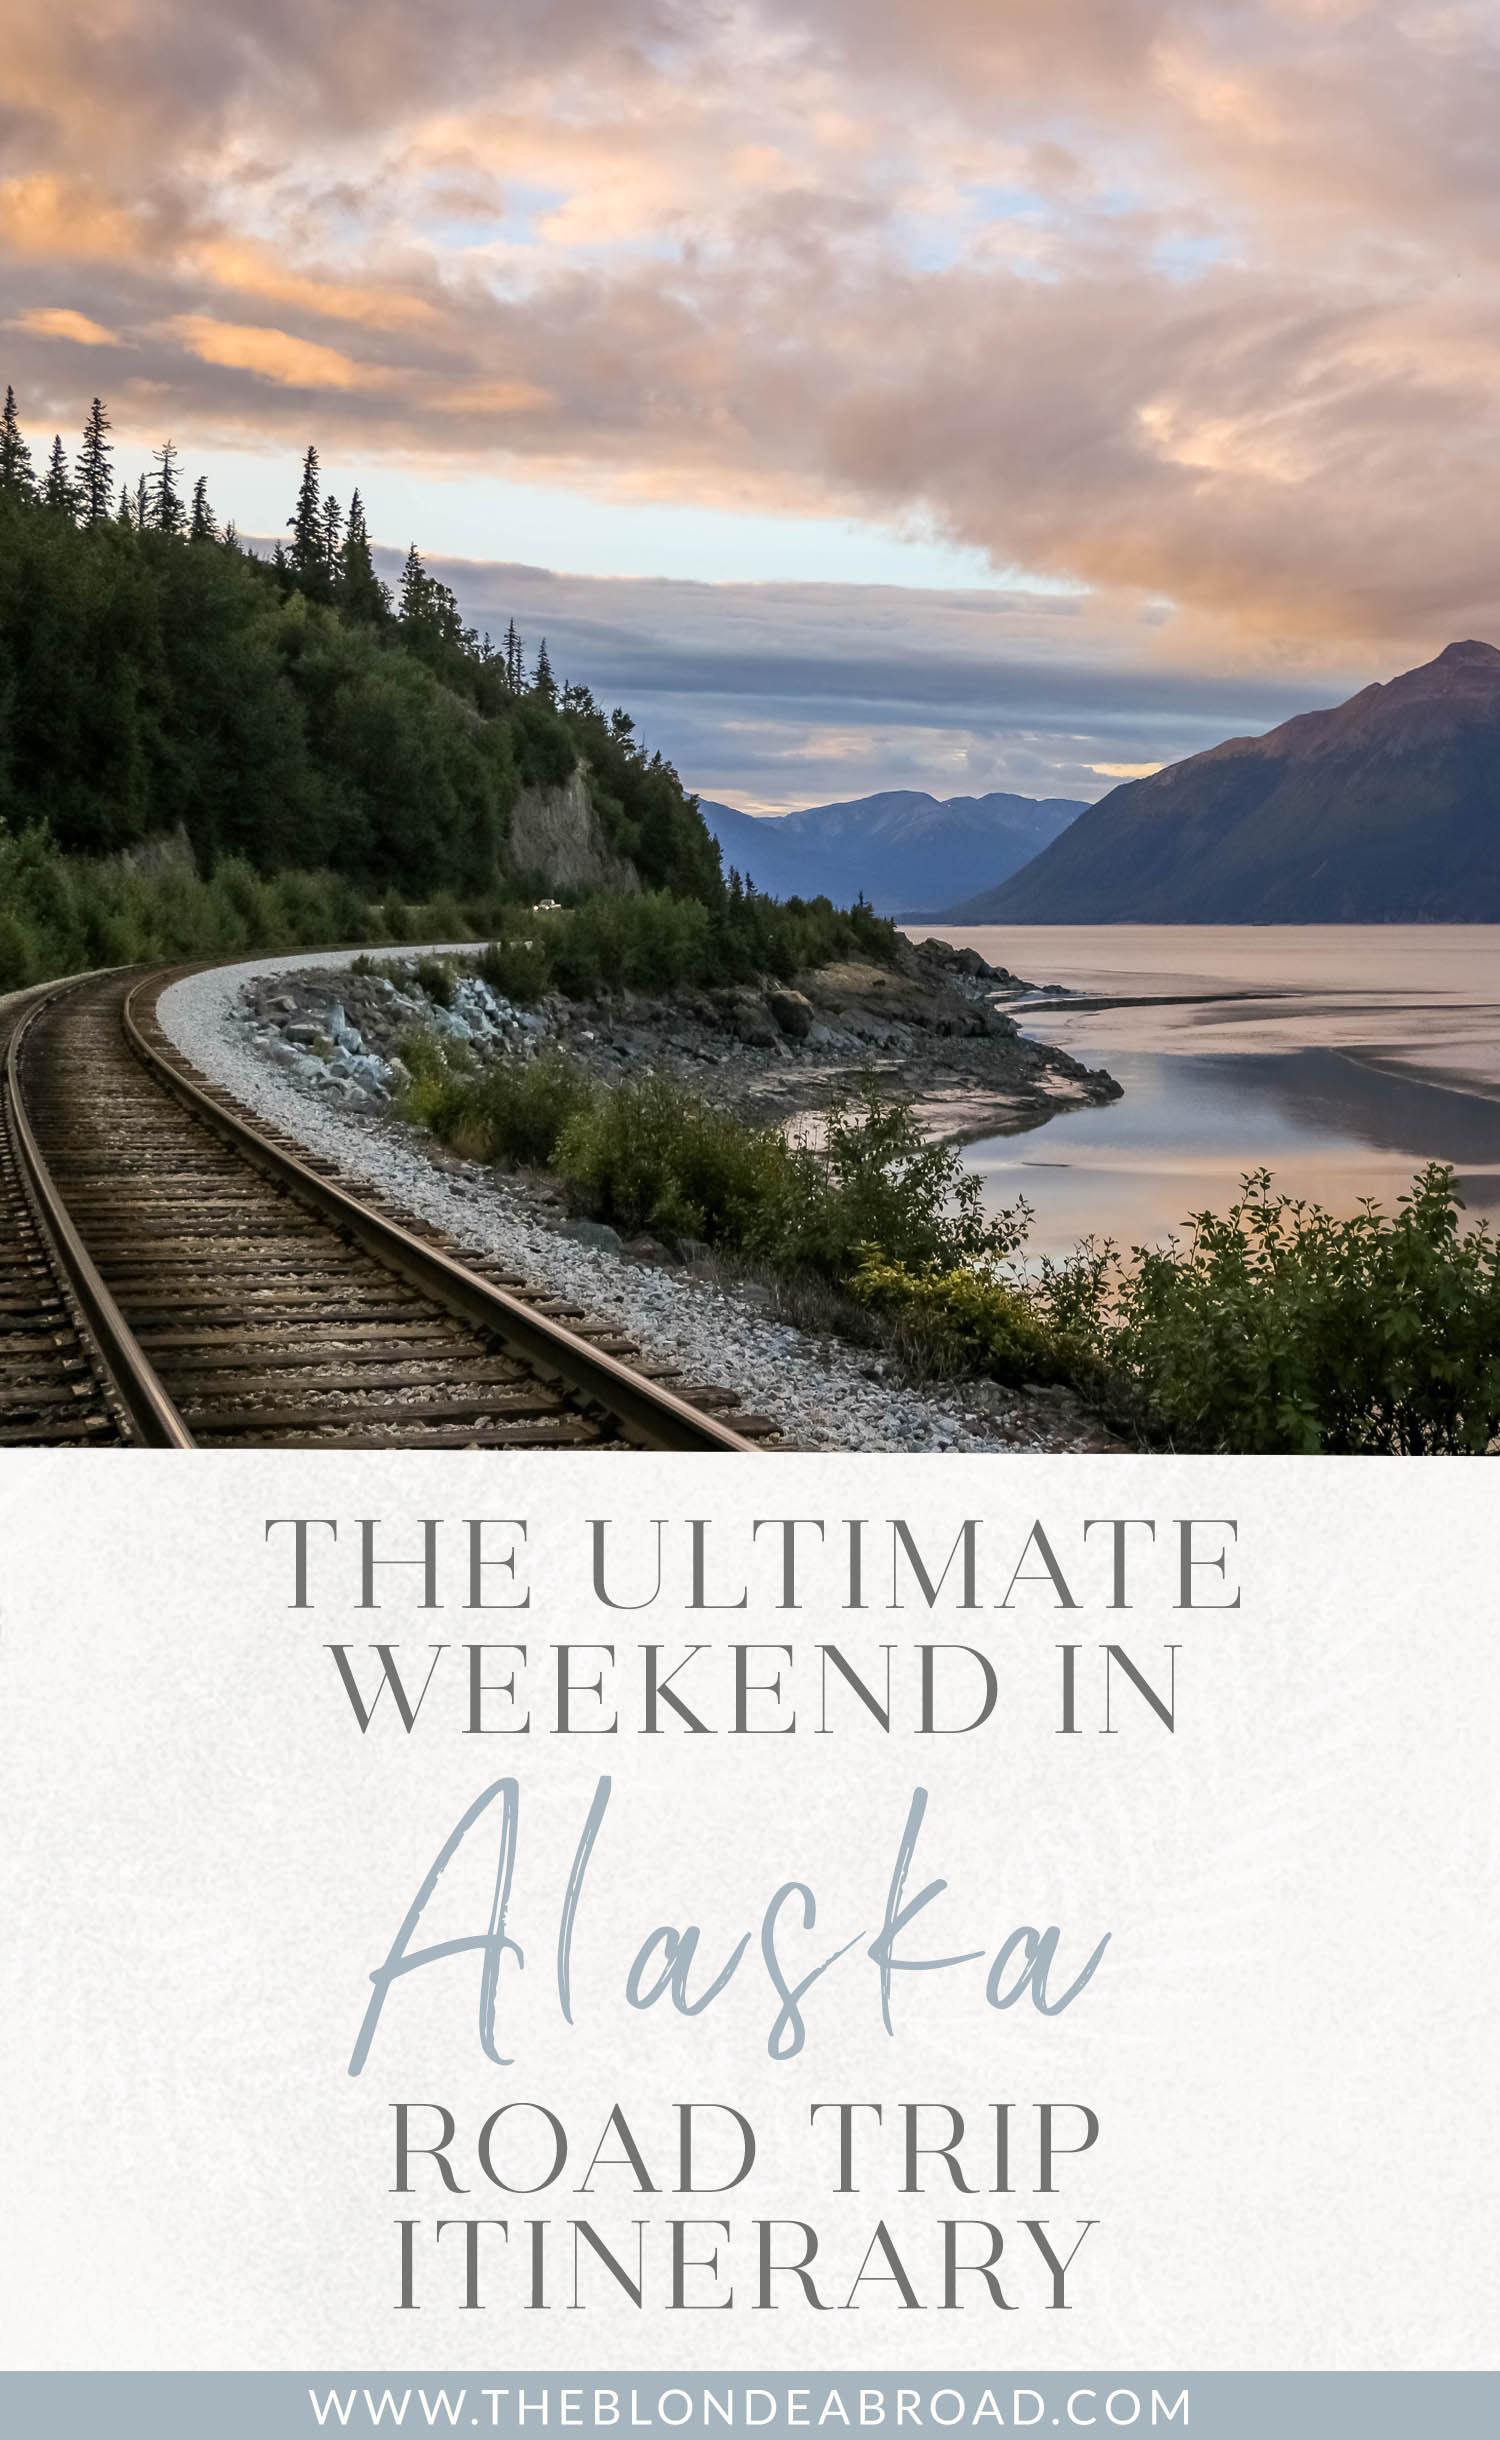 The Ultimate Weekend in Alaska Road Trip Itinerary